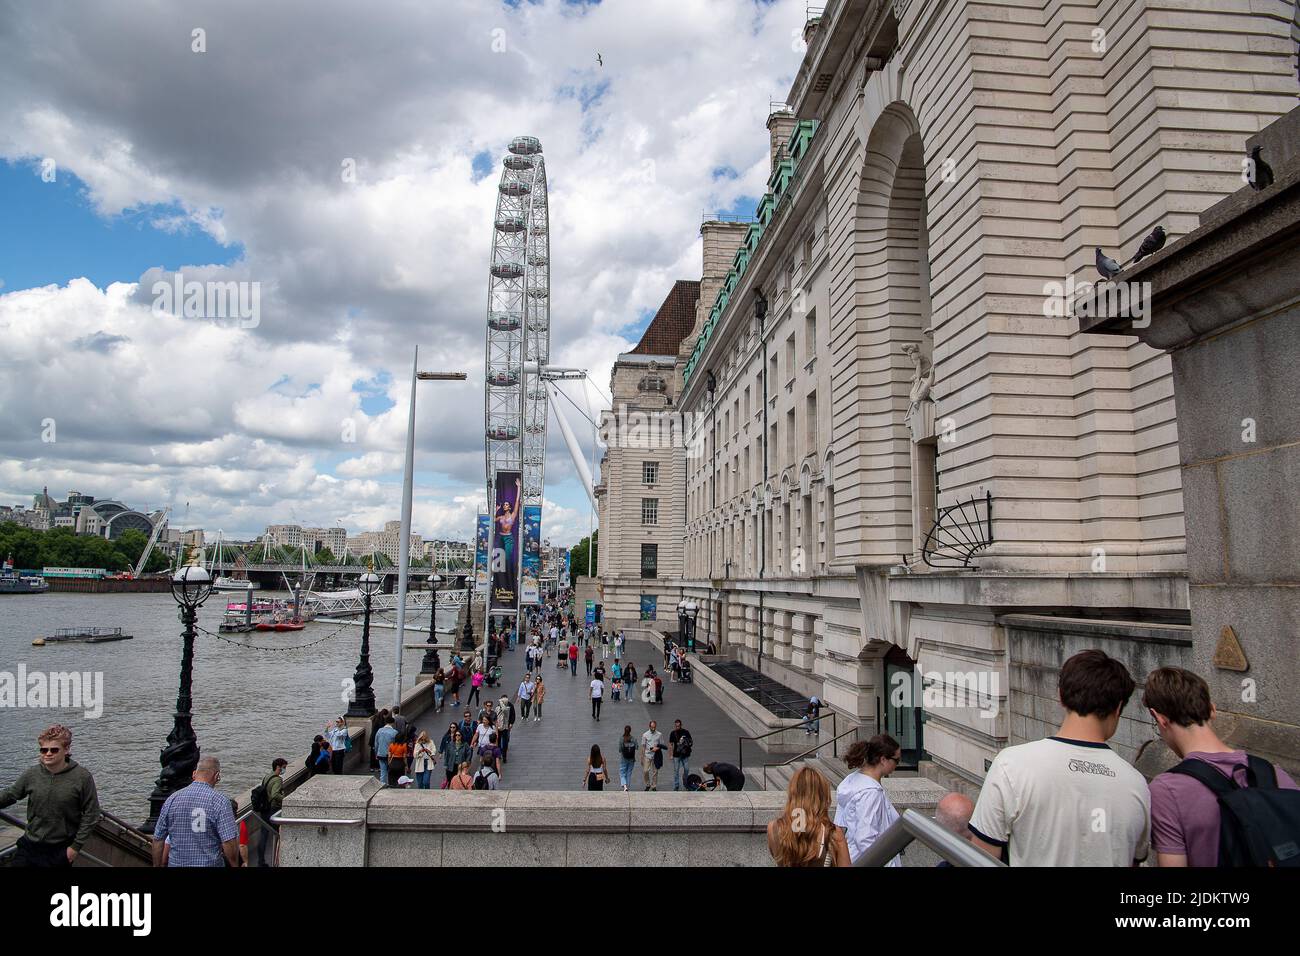 Westminster, London, UK. 8th June, 2022. A busy day in London as tourists walk past County Hall and the London Eye. Credit: Maureen McLean/Alamy Stock Photo